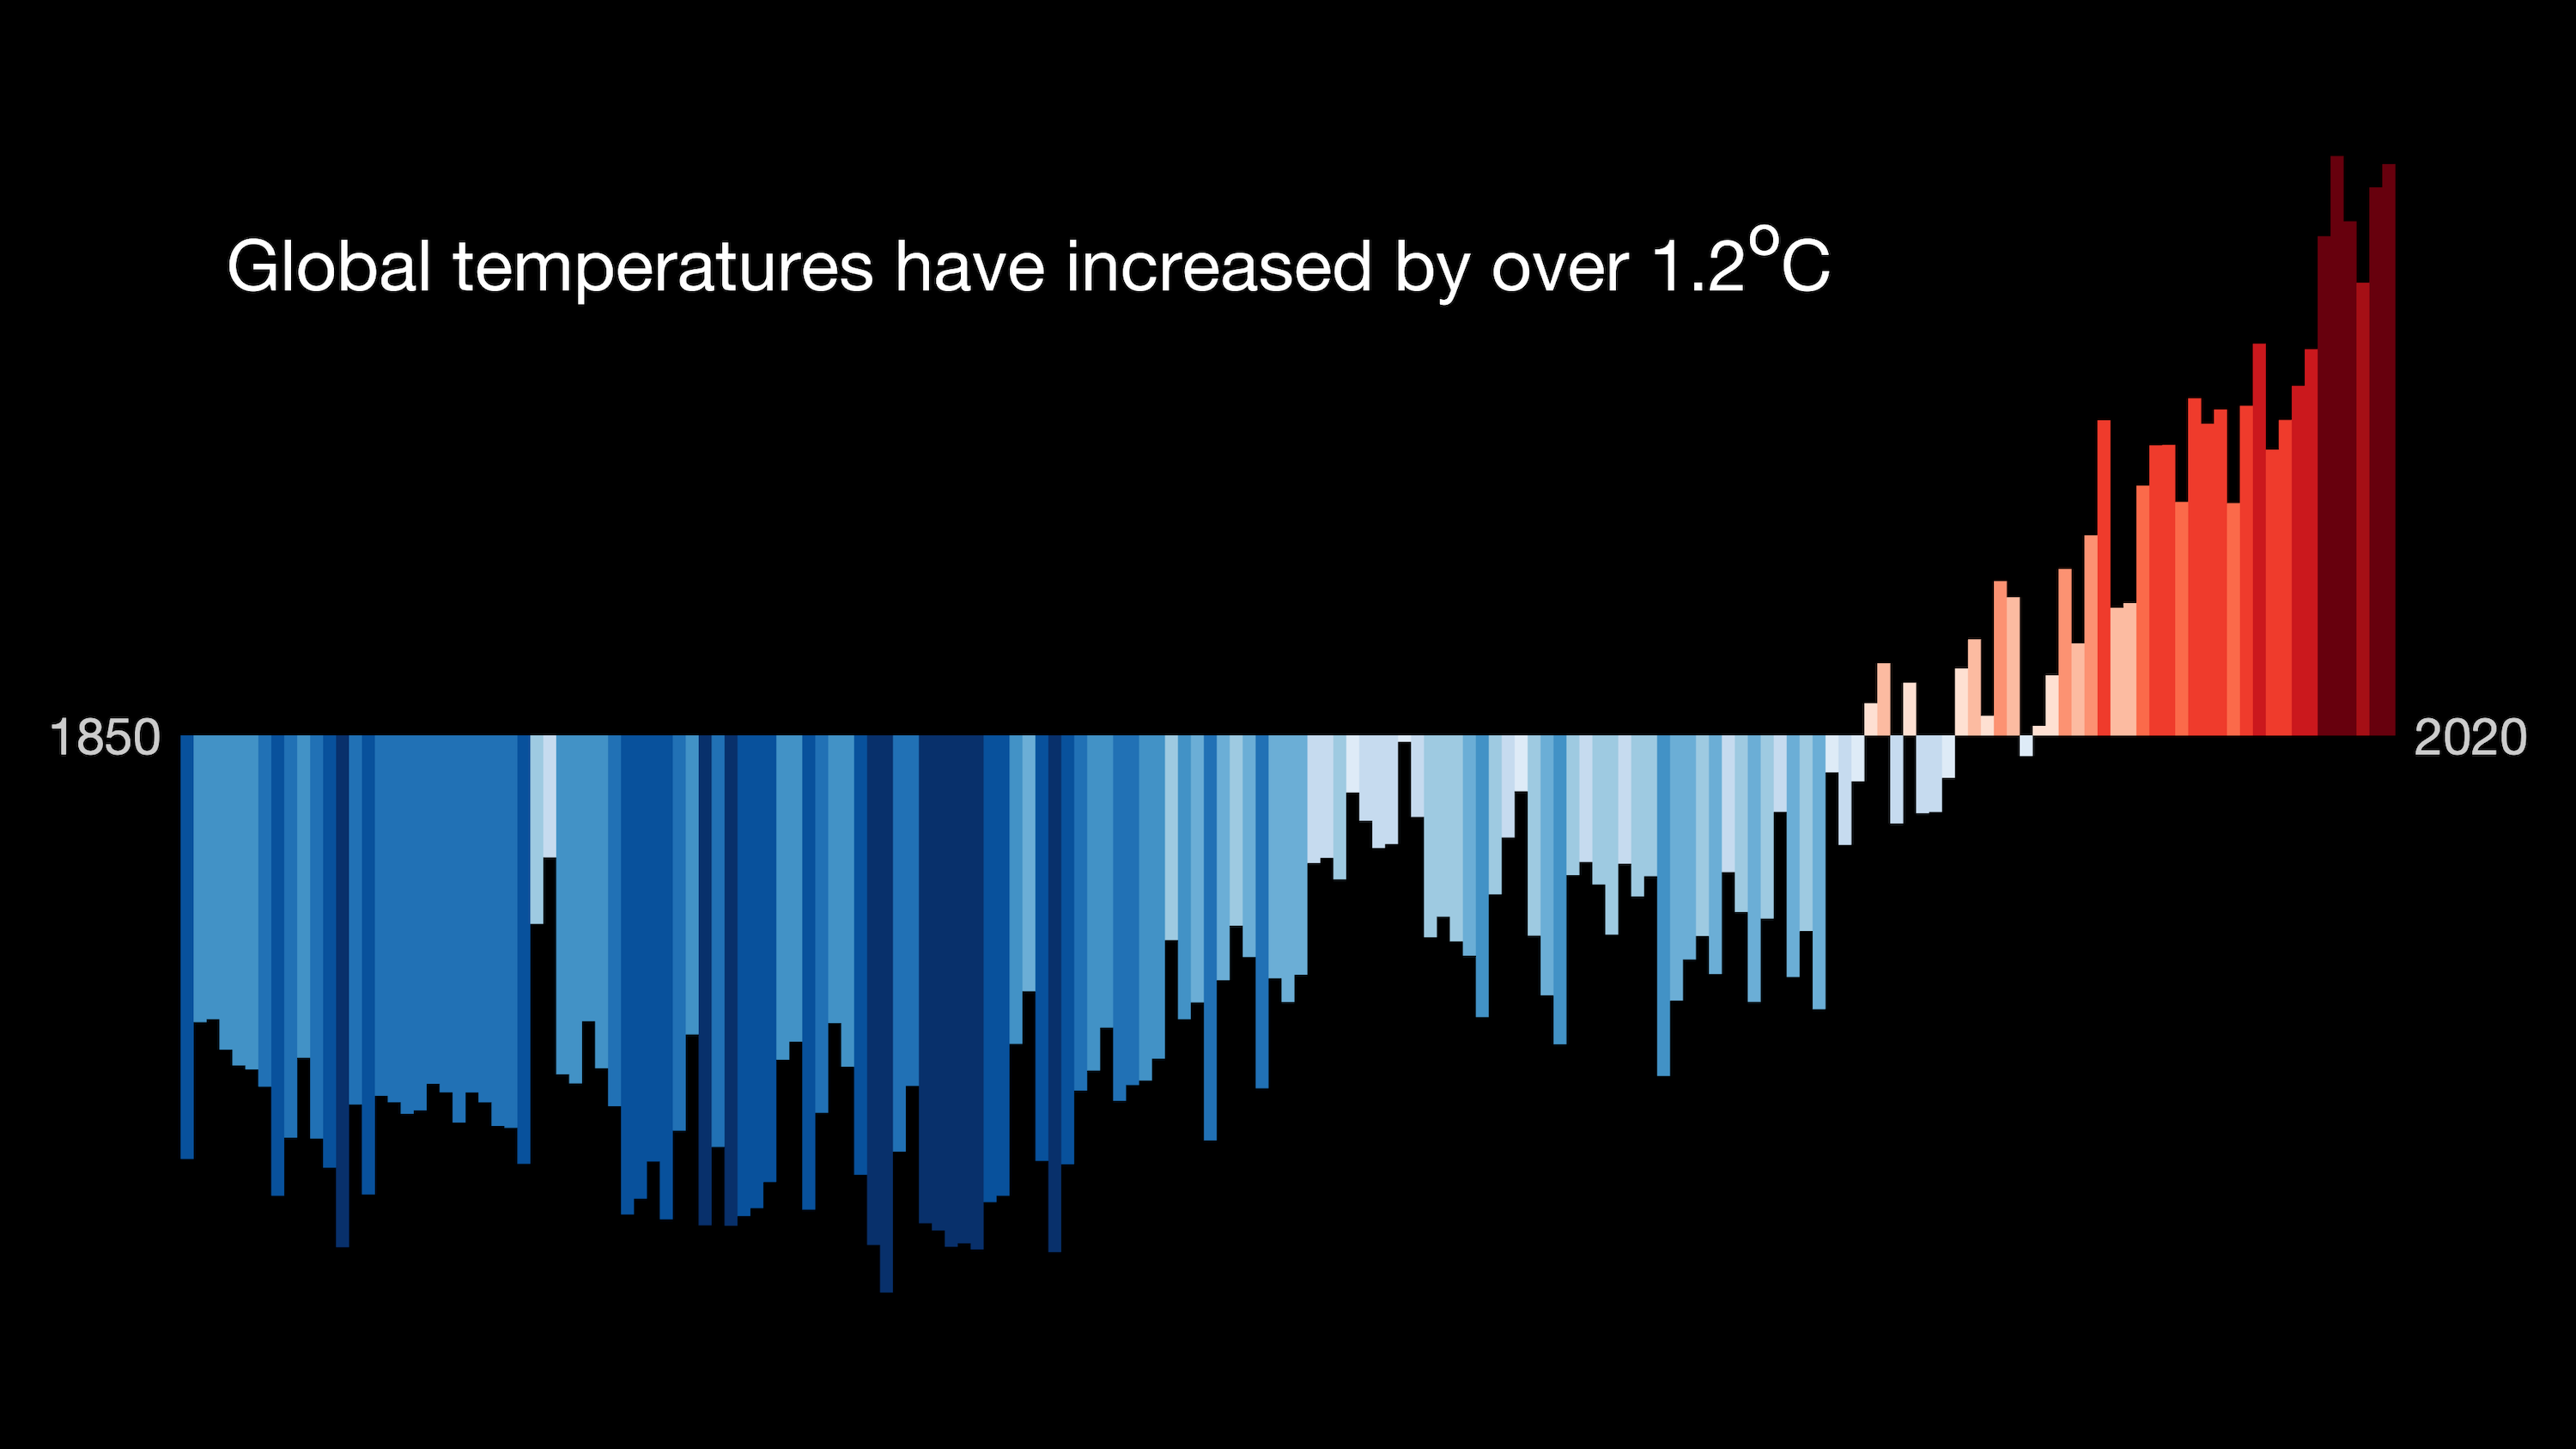 A bar chart showing rising temperatures from 1850 to 2020...